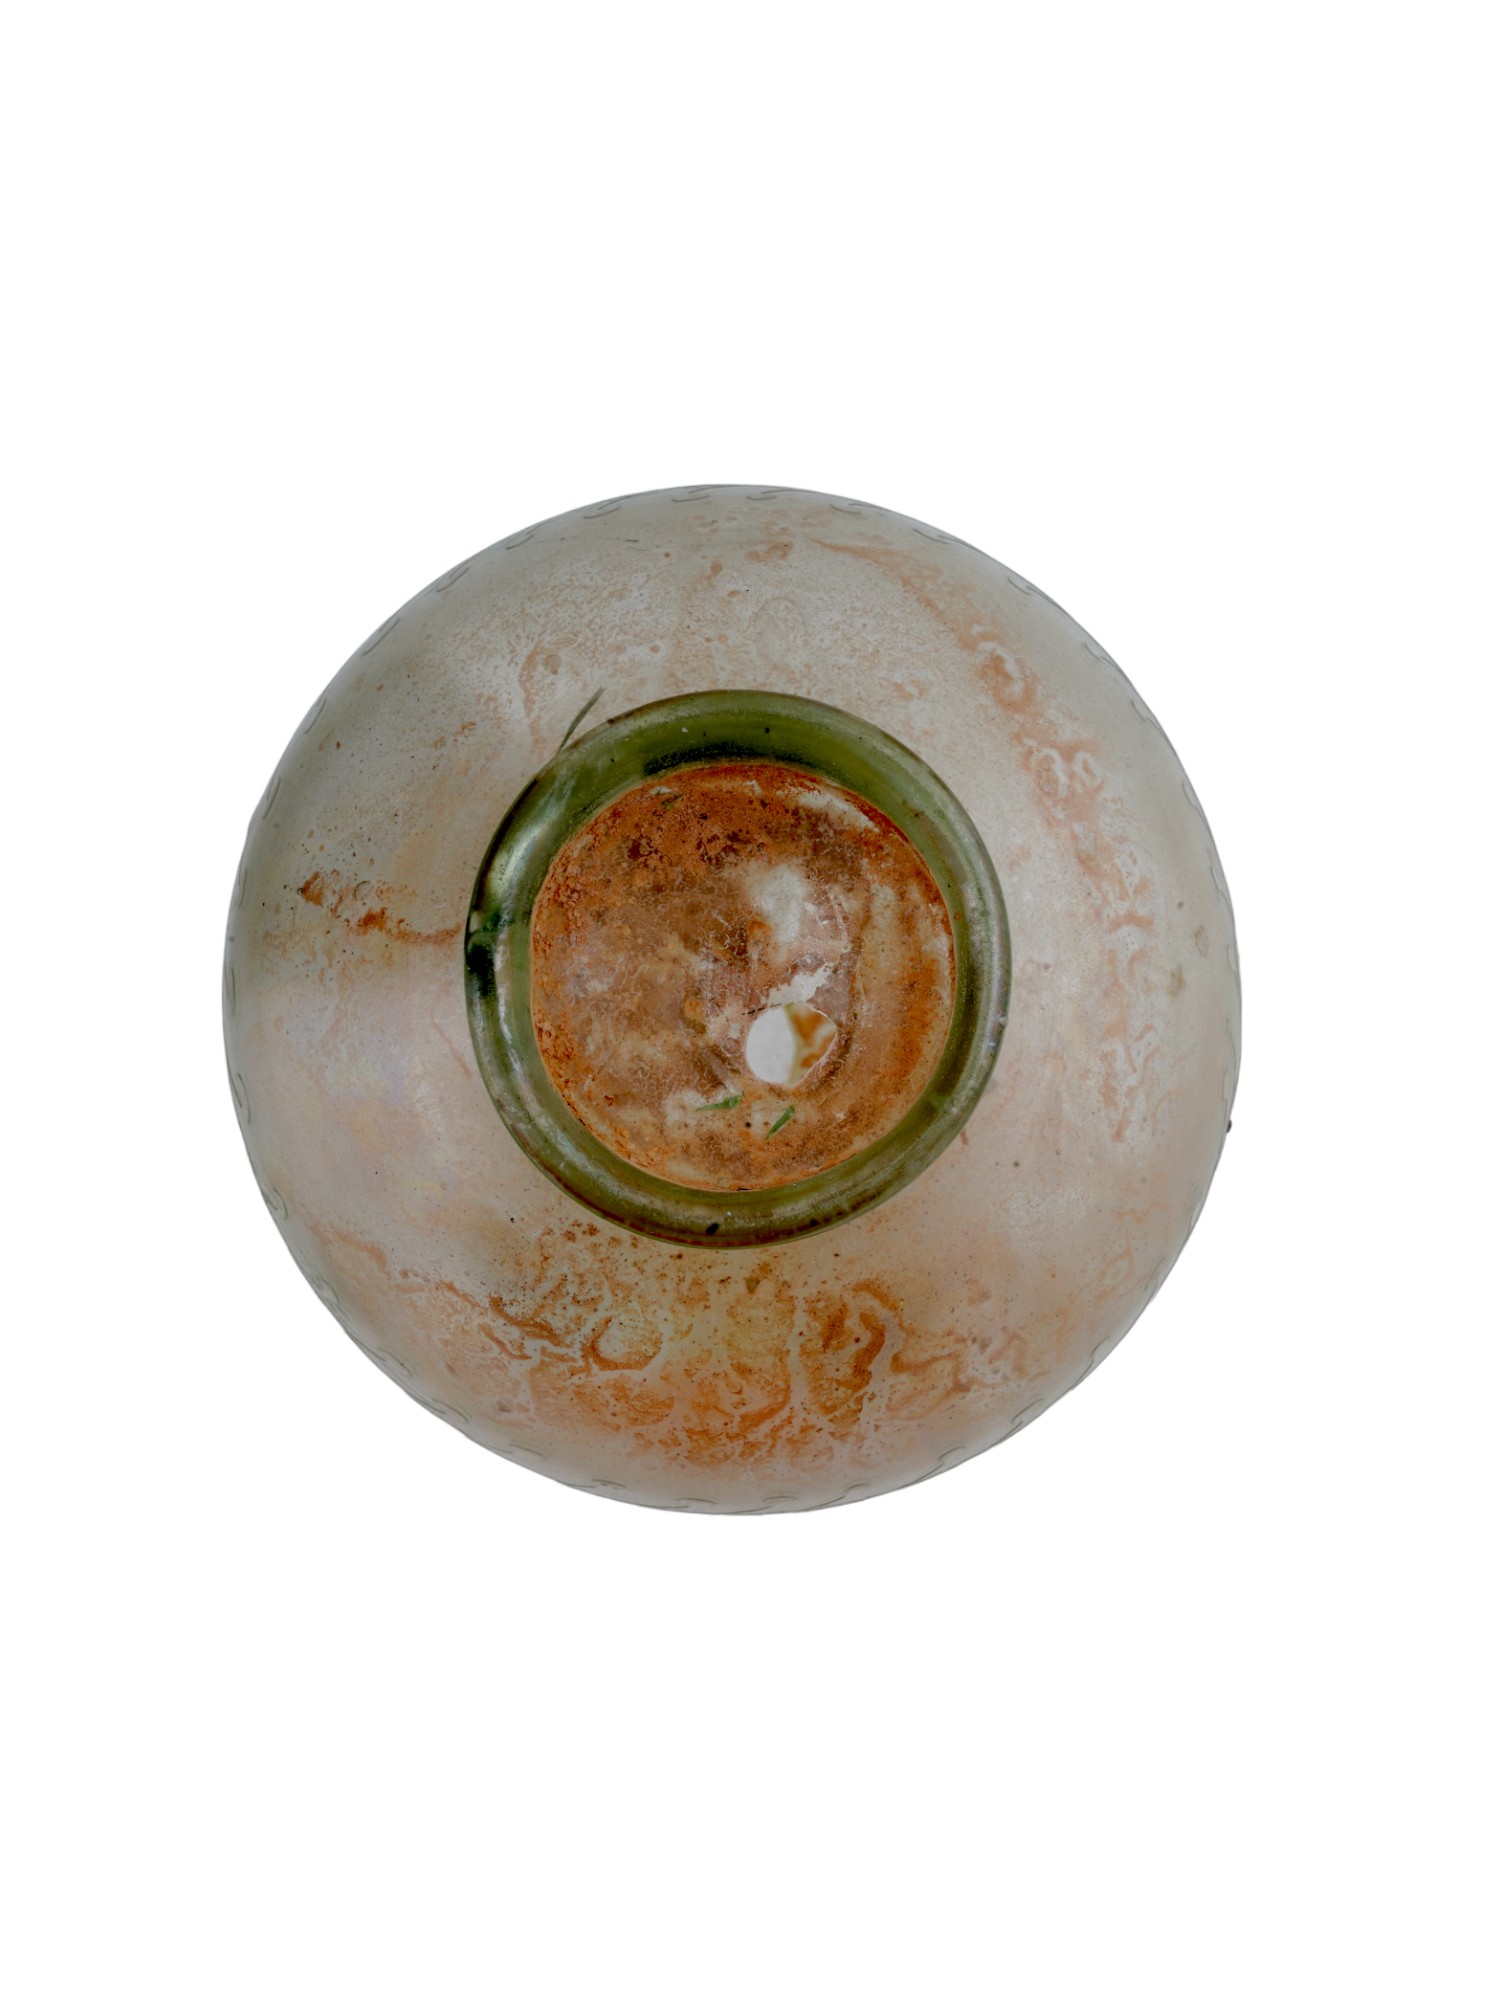 ANCIENT ISLAMIC GLASS MOLDED BOTTLE WITH NATURAL DECOR PIC-4